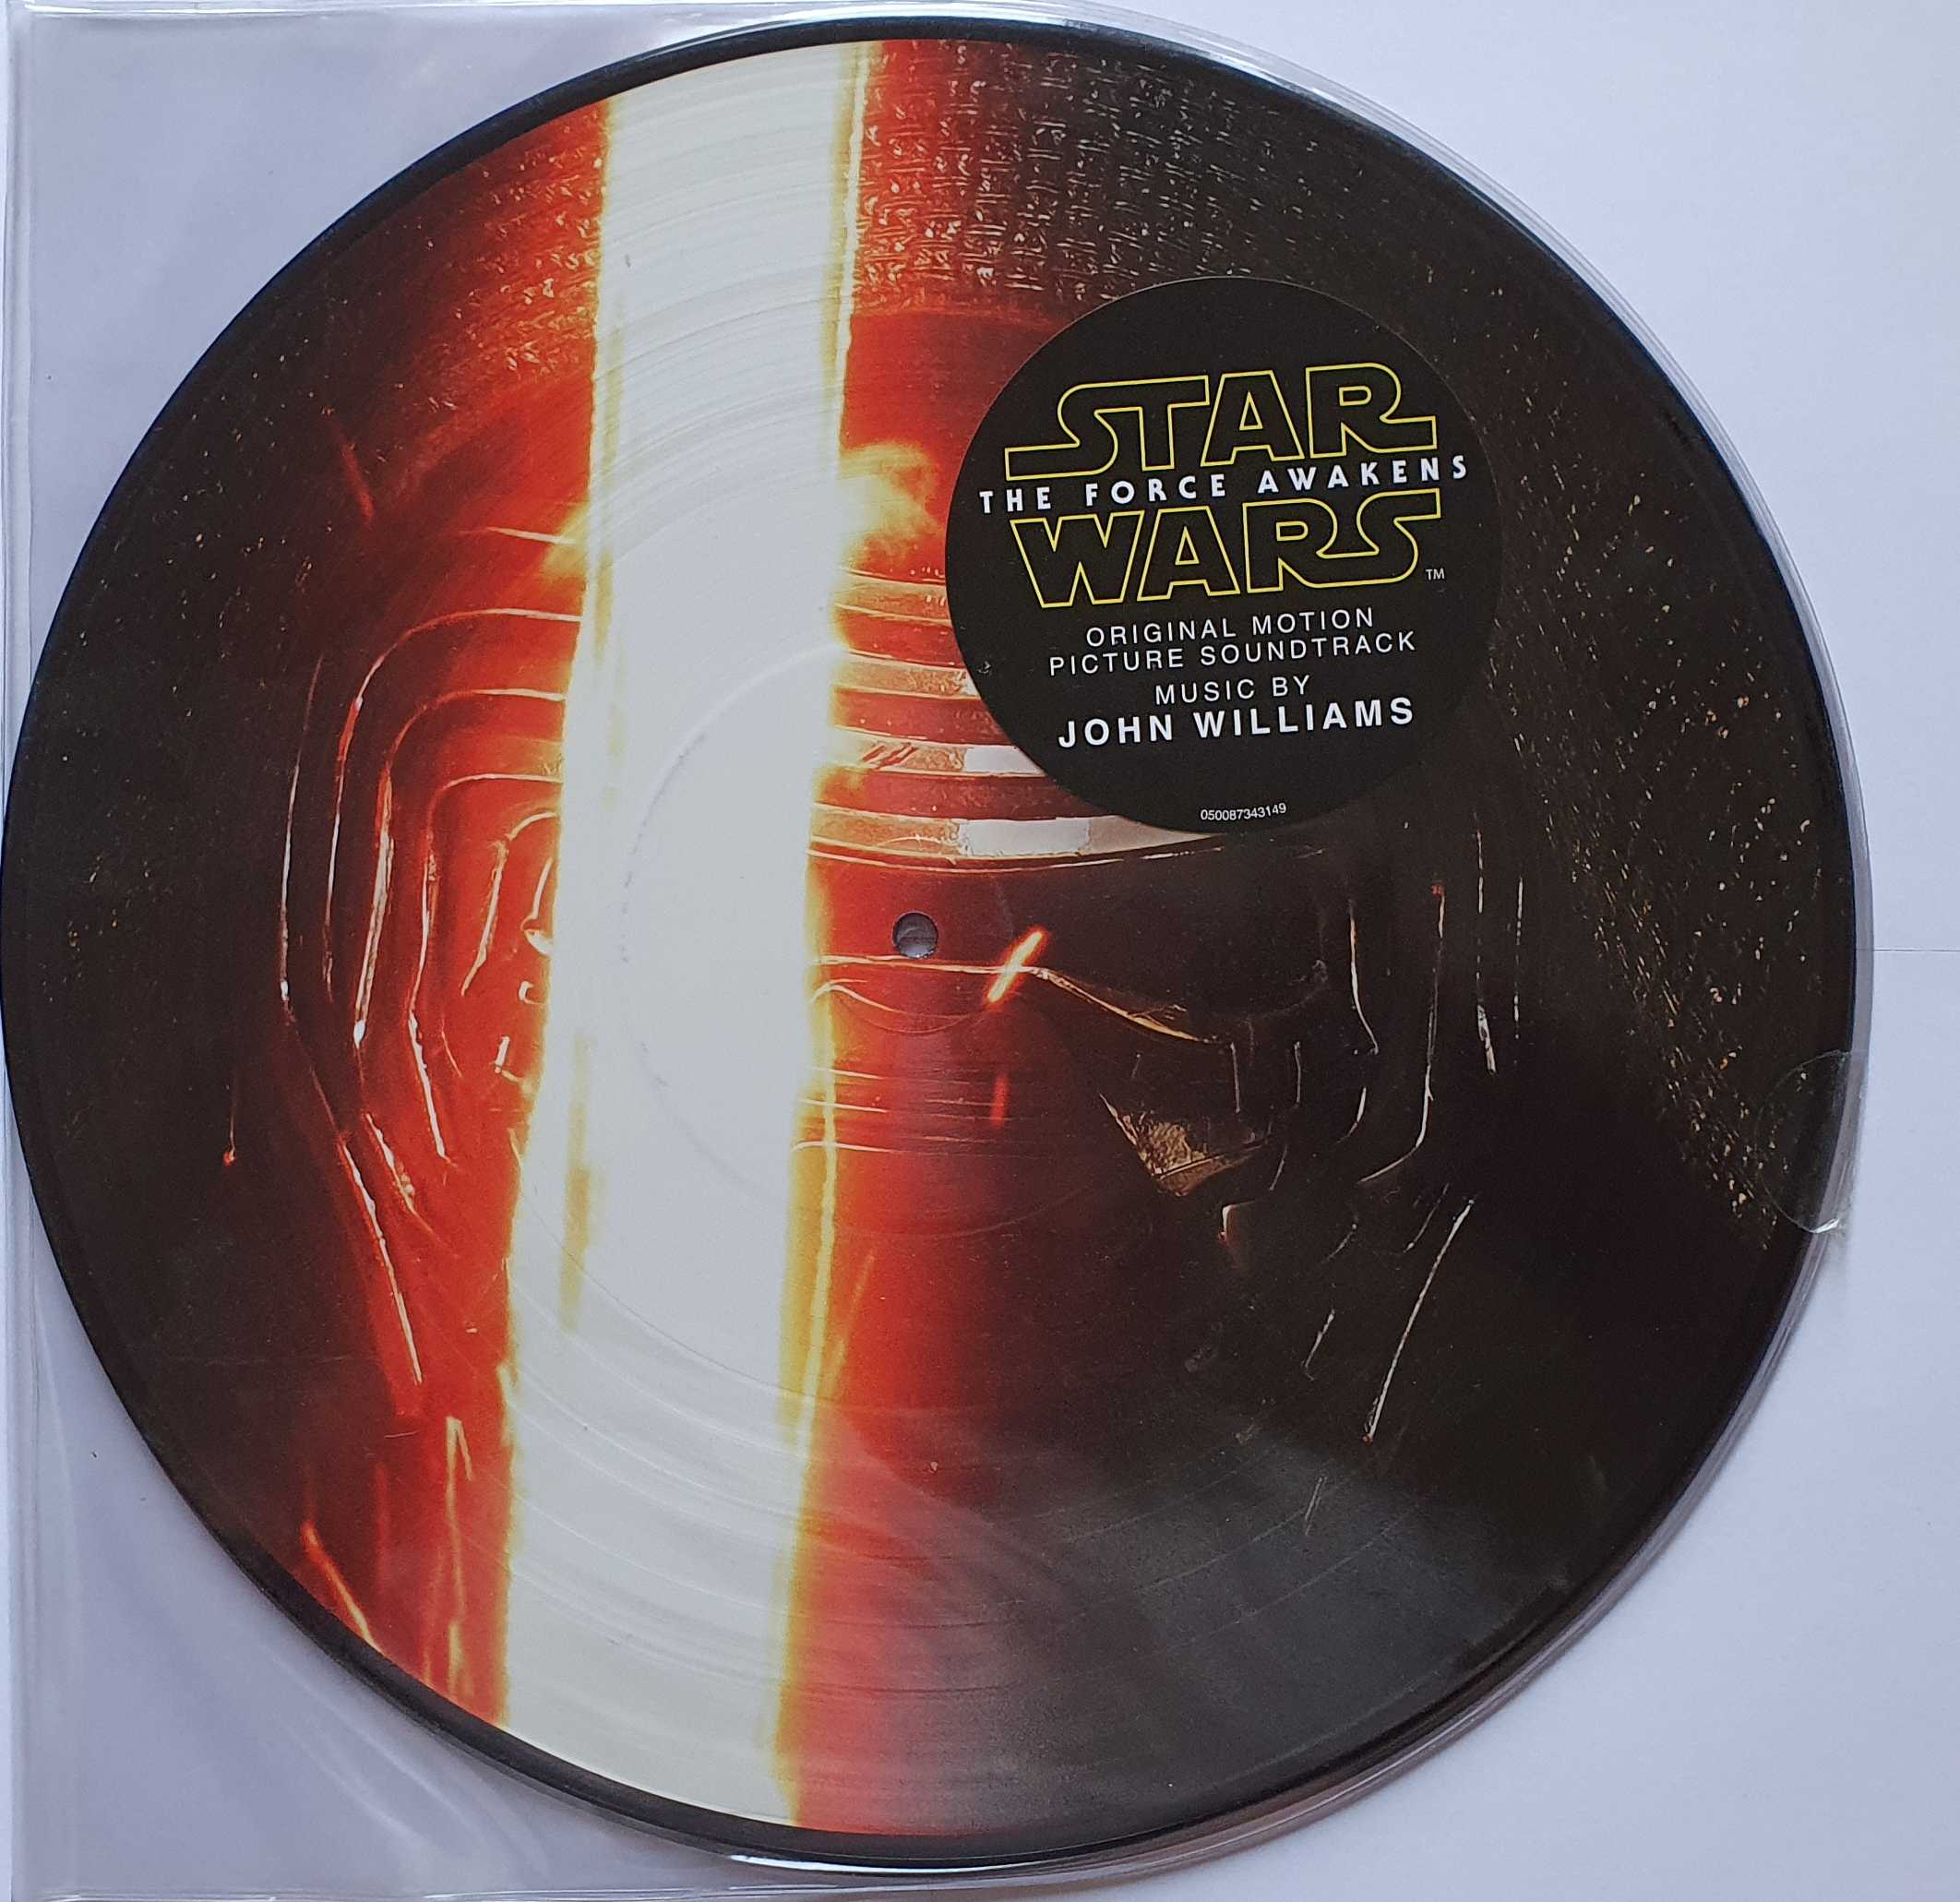 Picture of Star Wars: The Force Awakens by artist John Williams from ITV, Channel 4 and Channel 5 albums library